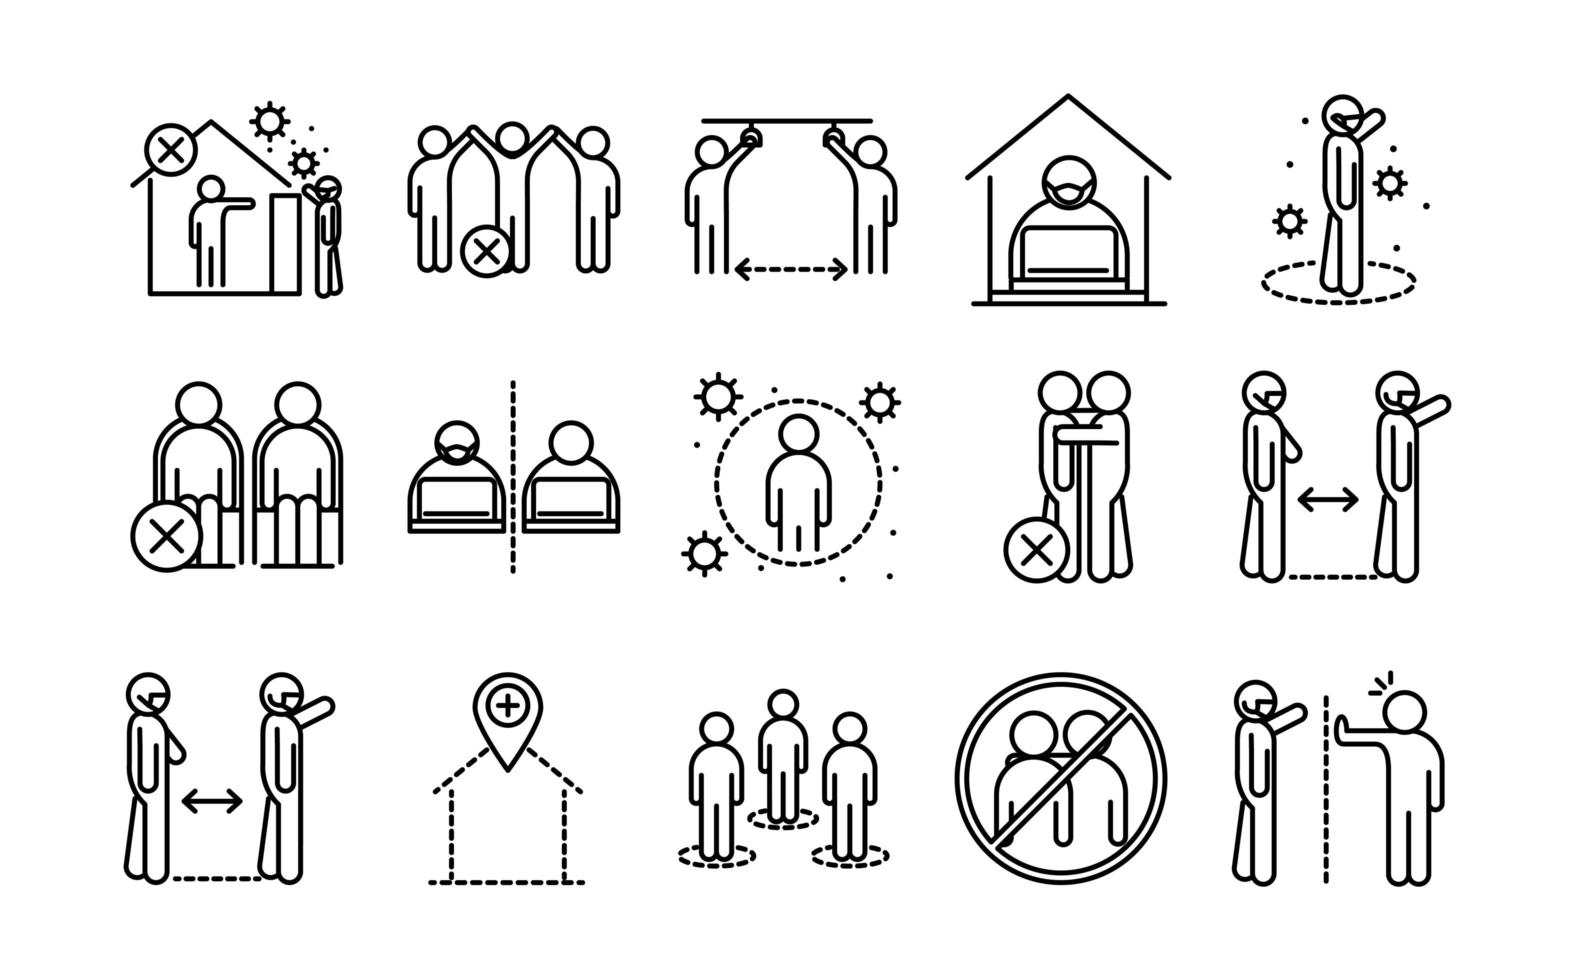 Coronavirus and social distance outline pictogram icon collection vector